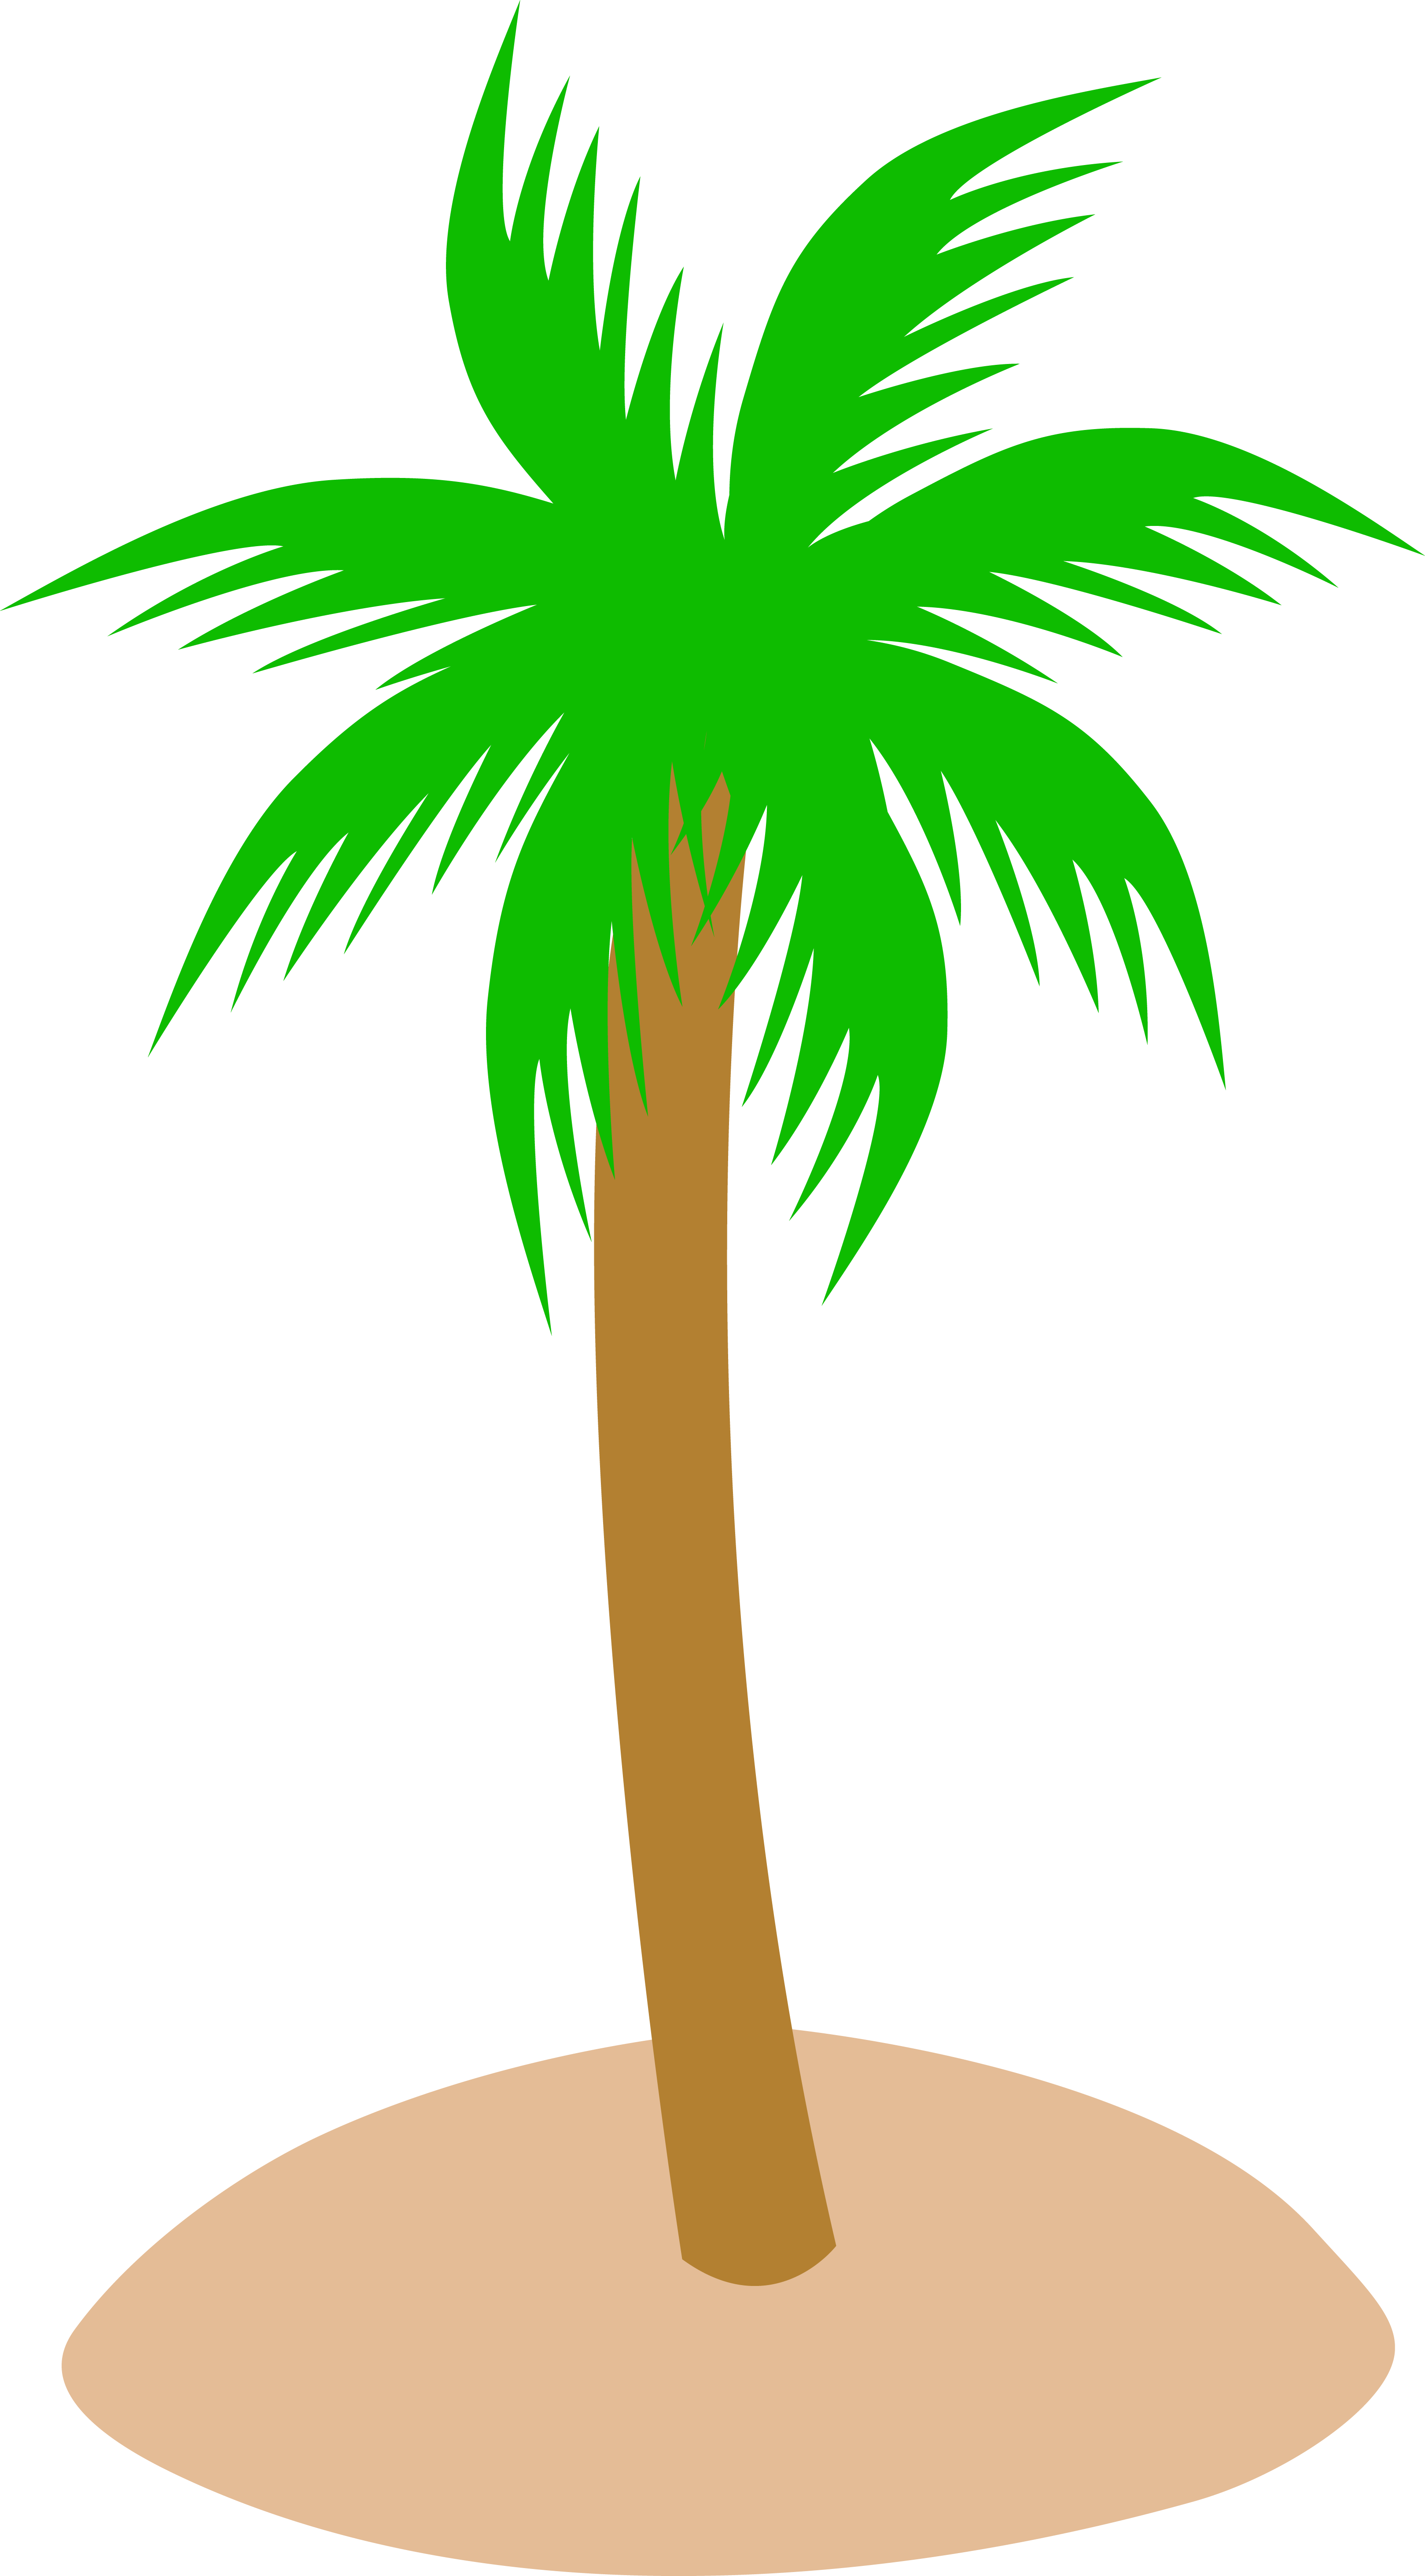 Cartoon Palmtree - Palm Tree On Sand - (3237x5853) Png Clipart Download